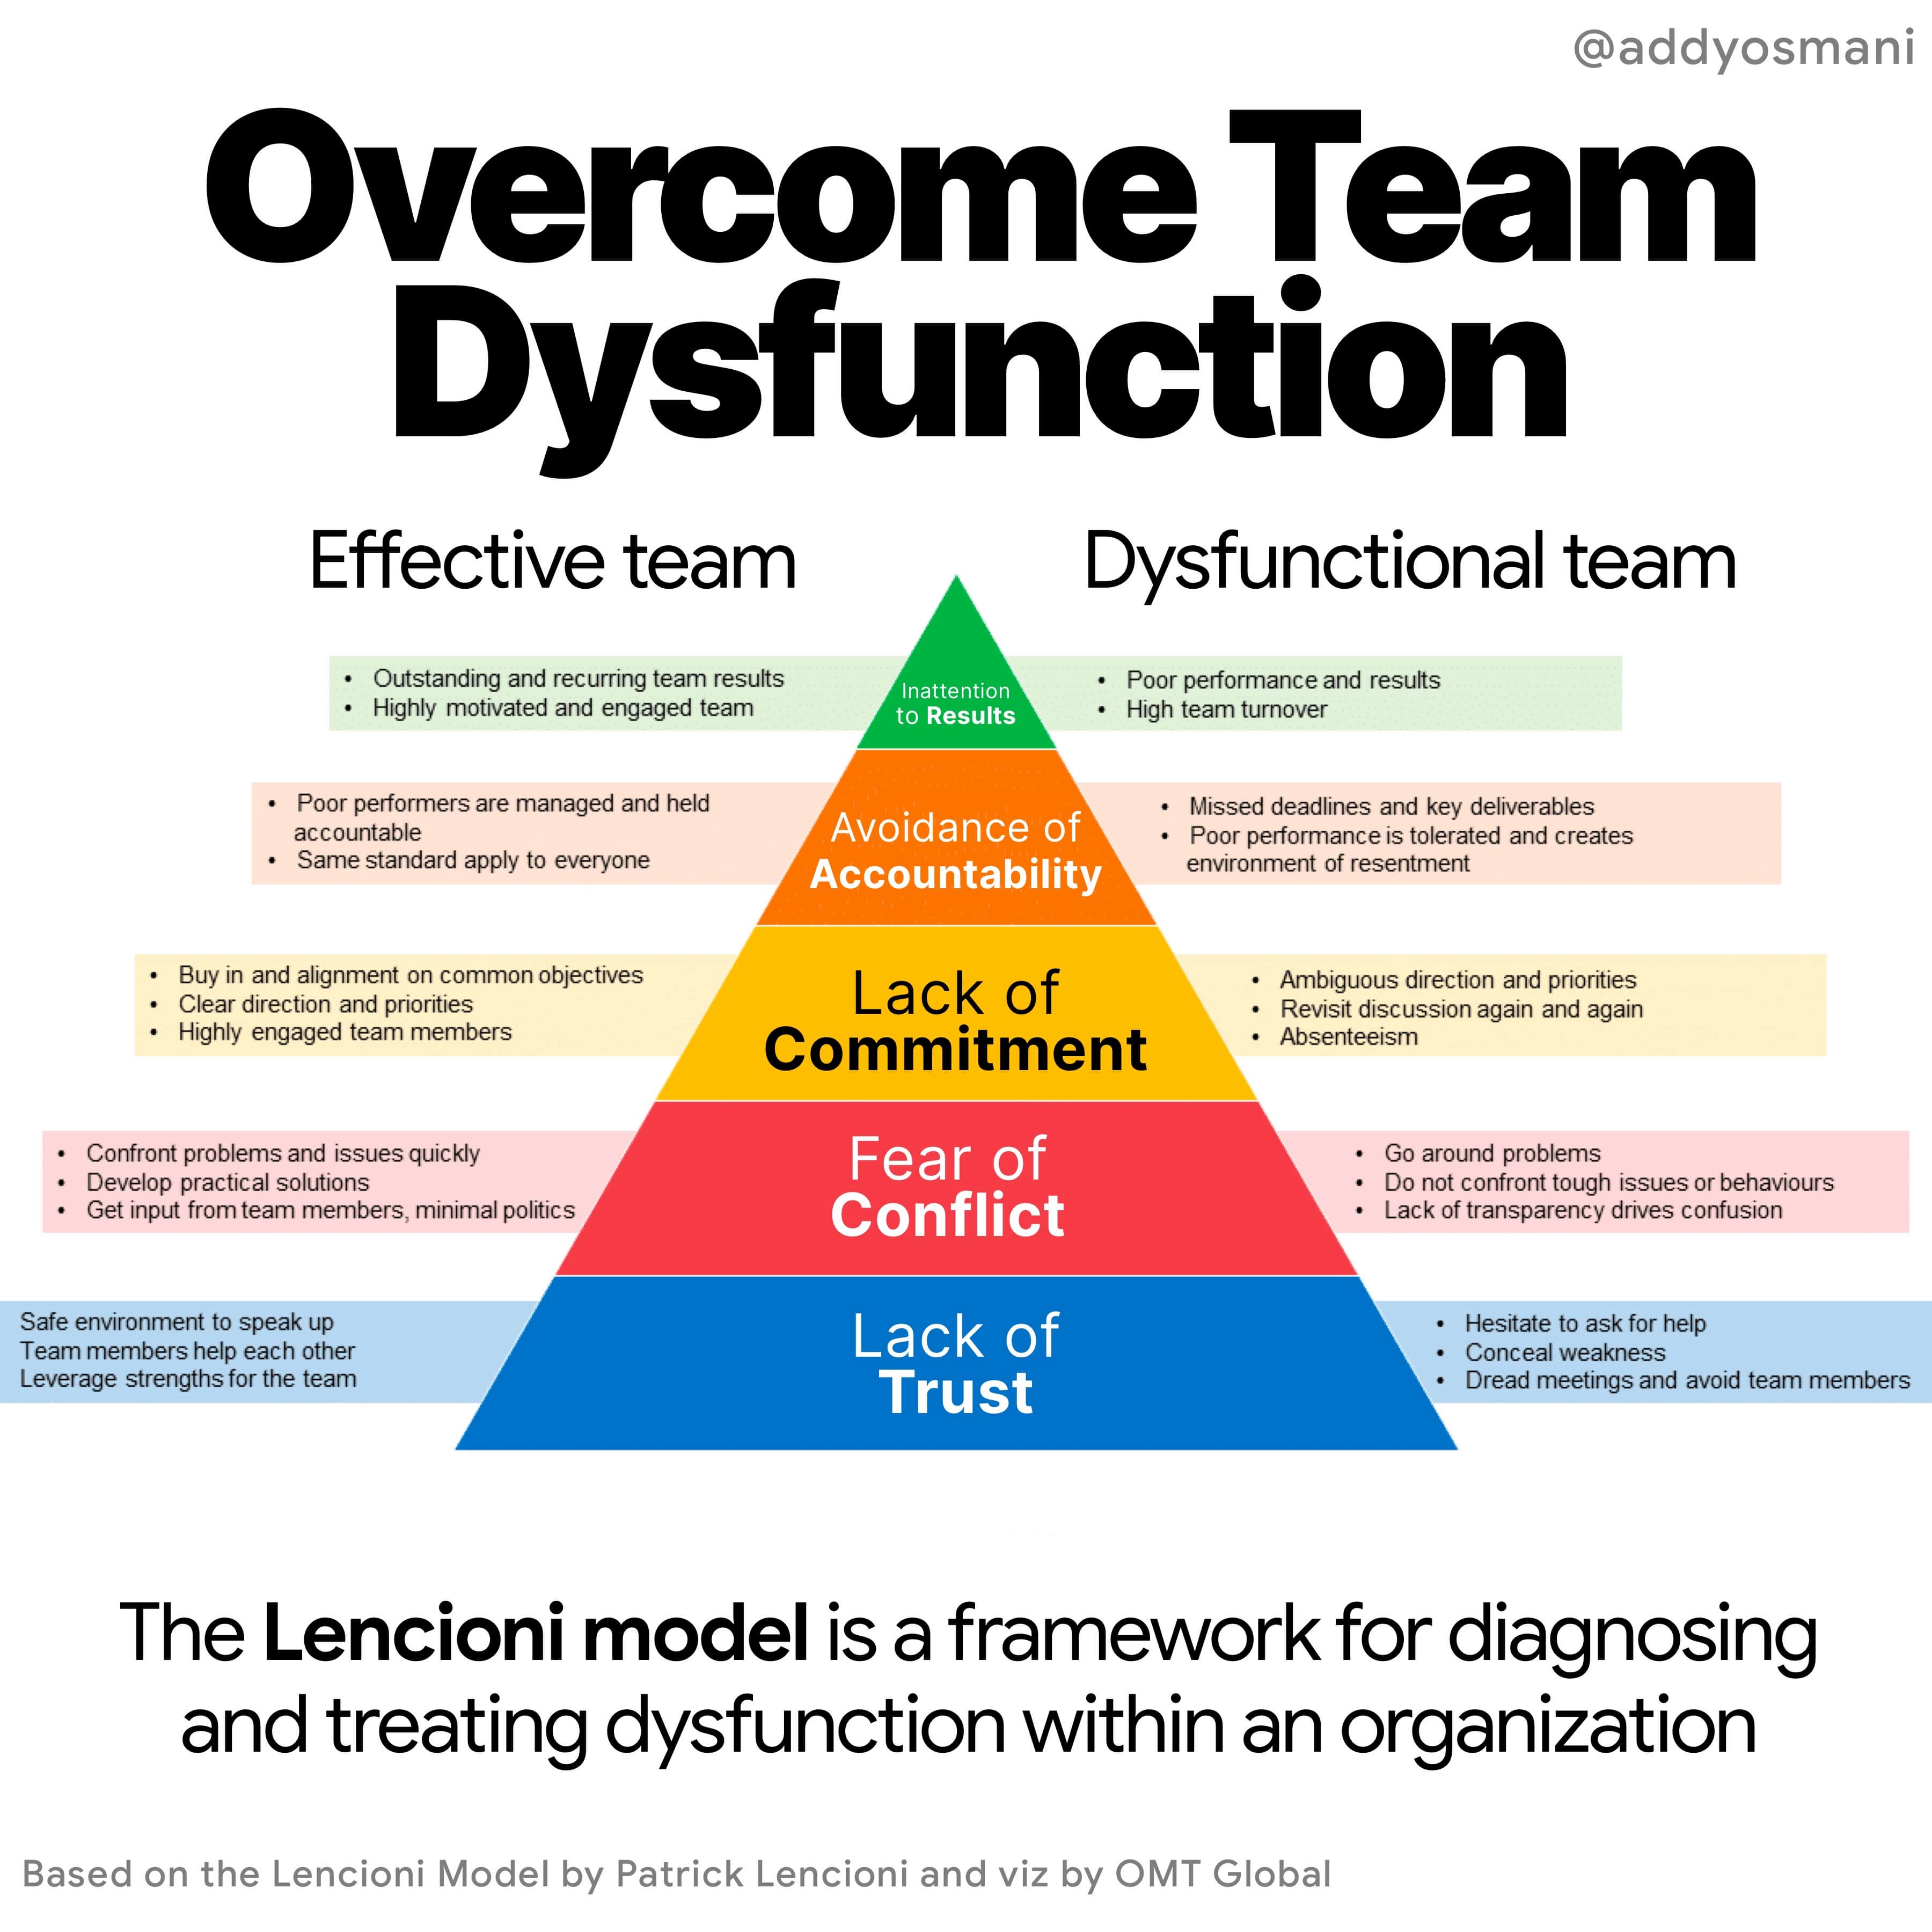 The Lencioni Model for debugging team dysfunctions